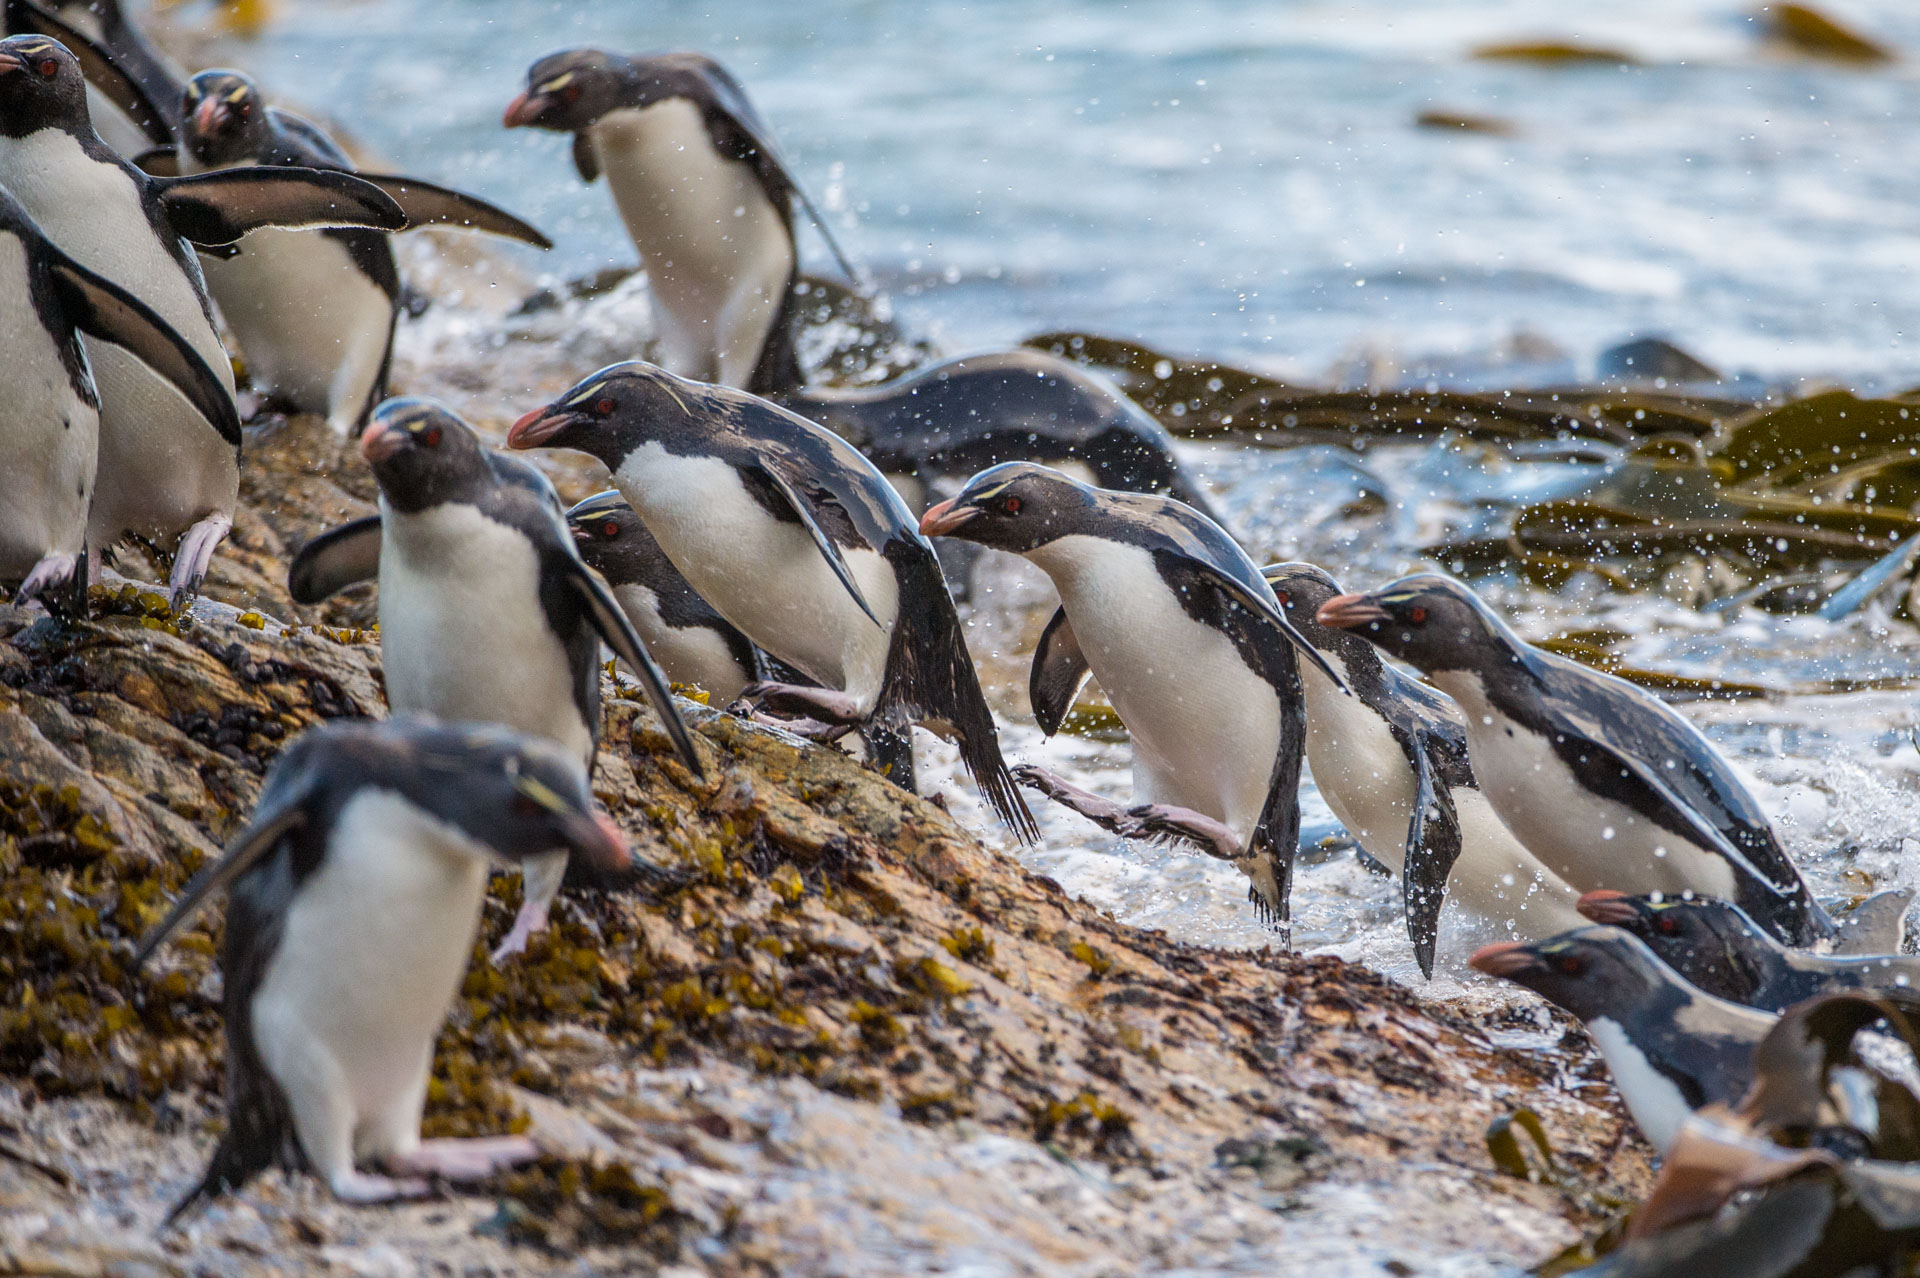 Adult Southern Rockhopper Penguins, Eudyptes chrysocome, jumping out of the sea.